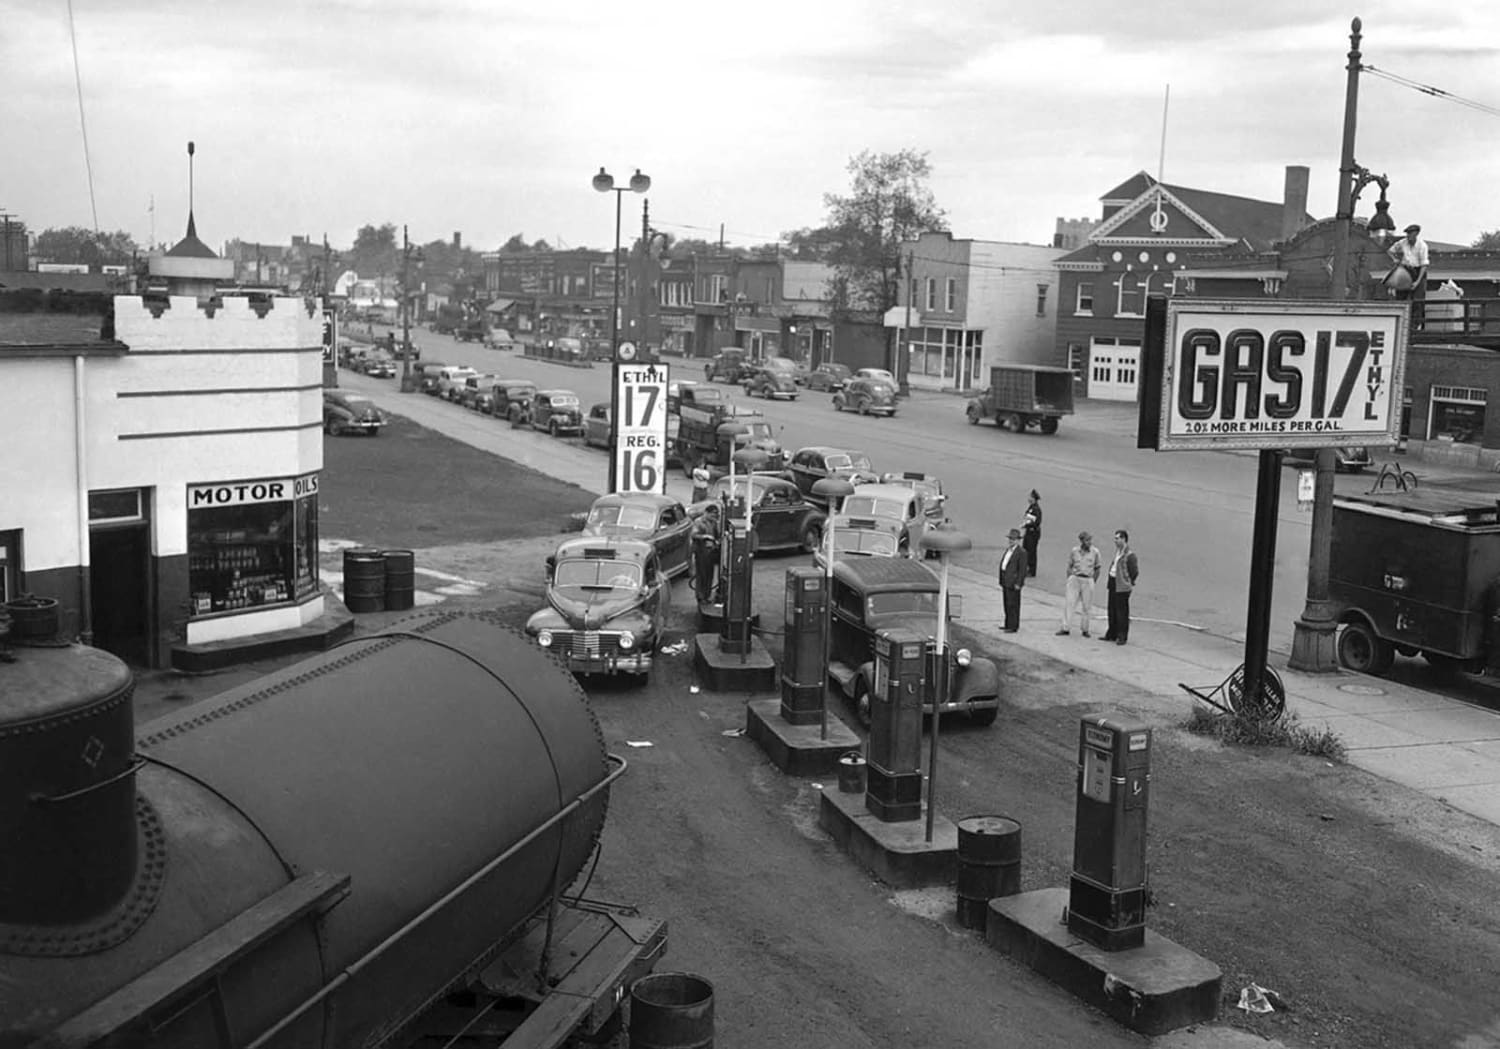 Motorists line a street waiting to buy gasoline at 17 cents per gallon at this station in Detroit on September 24th, 1945.